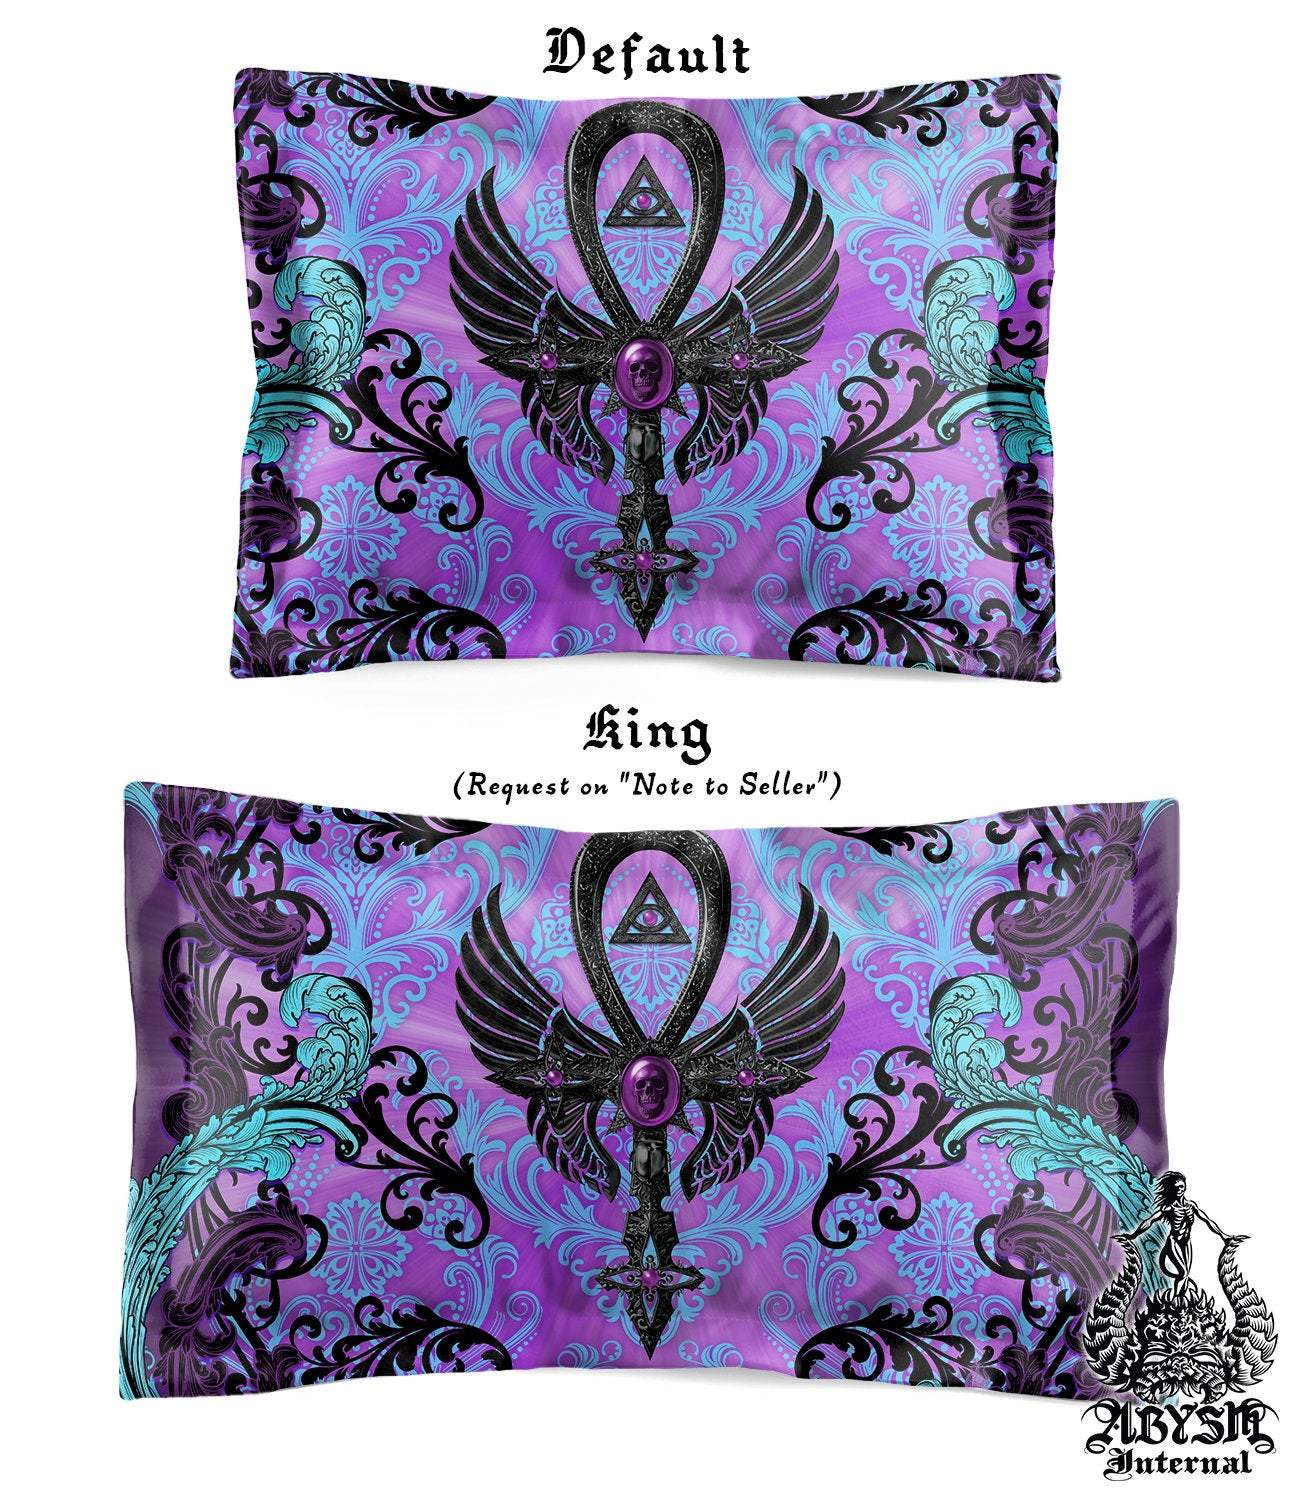 Pastel Goth Bedding Set, Comforter and Duvet, Ankh Cross, Gothic Bed Cover and Bedroom Decor, King, Queen and Twin Size - Black and Purple - Abysm Internal